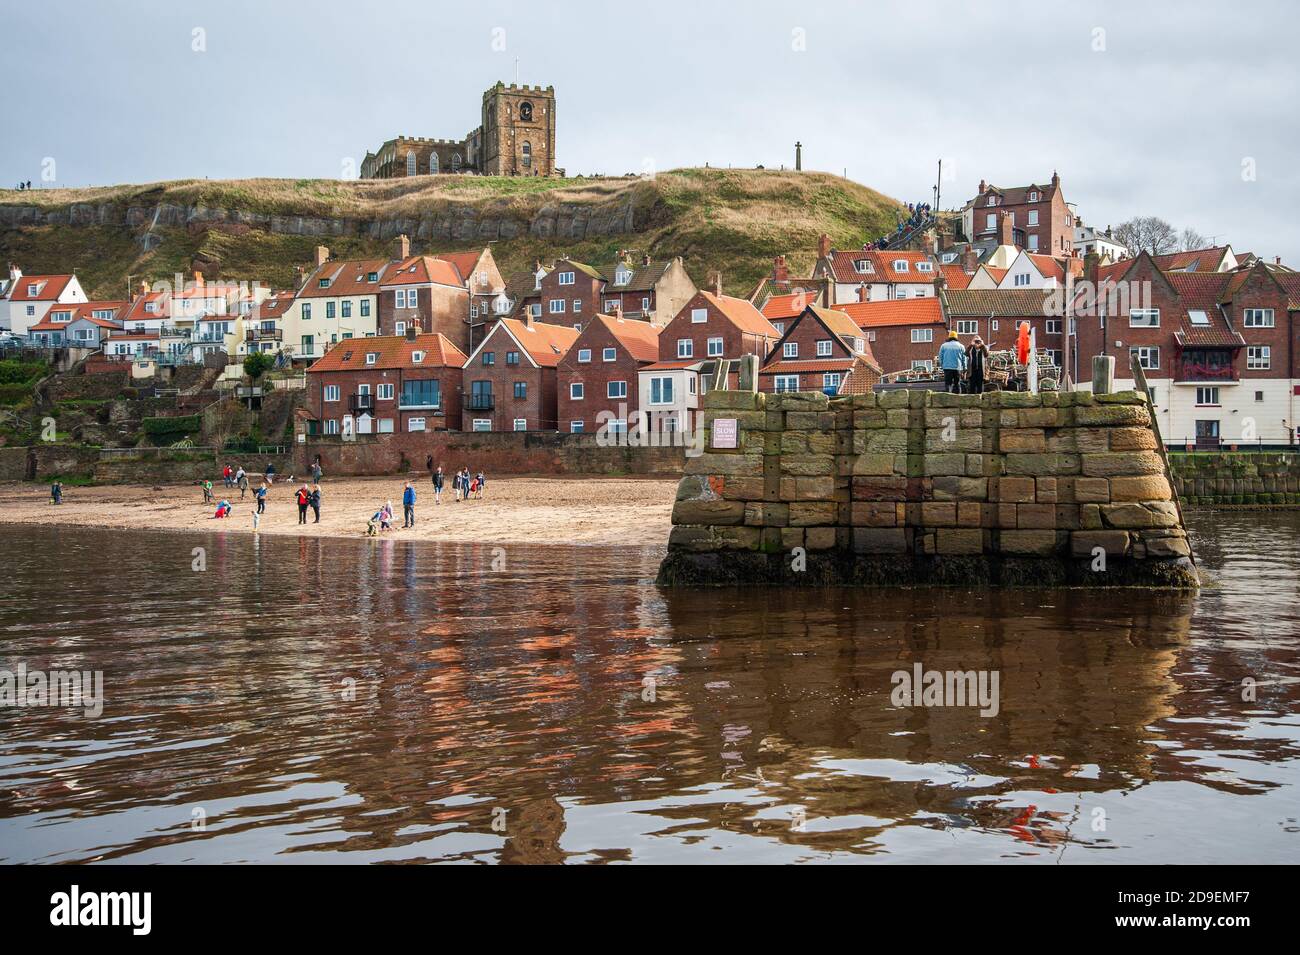 A view of the stone jetty with the abbey in the background. Whitby Harbour, Whitby, Yorkshire, England. Stock Photo